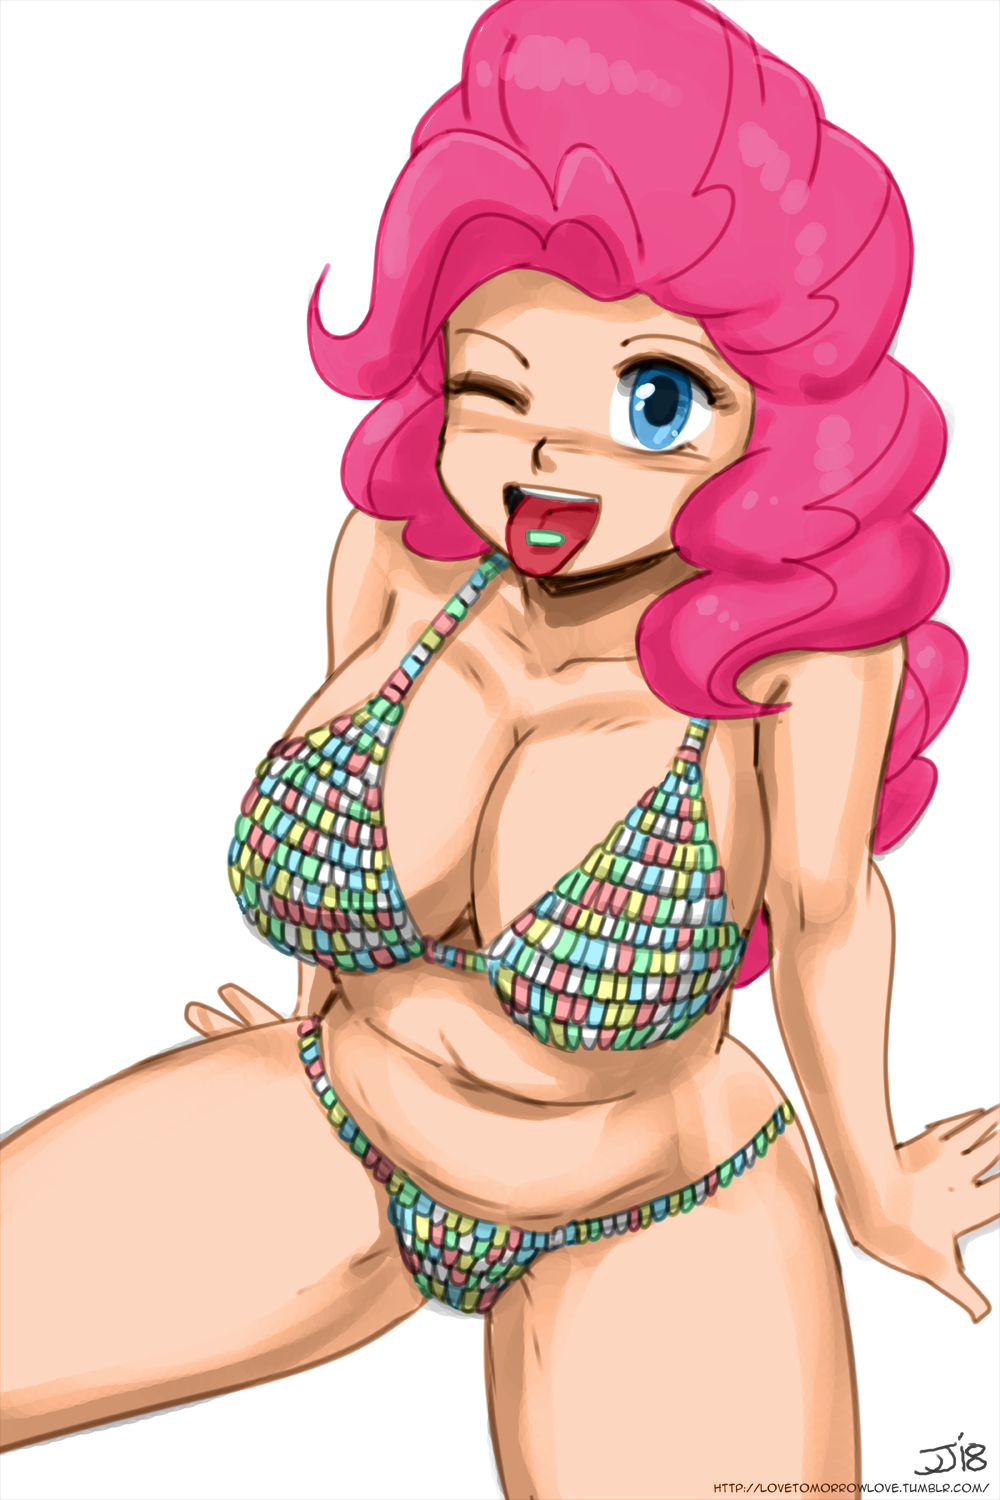 1_girl 1girl 2018 blue_eyes bra female female_only friendship_is_magic humanized john_joseco long_hair long_pink_hair looking_at_viewer mostly_nude my_little_pony one_eye_closed open_mouth panties pink_hair pinkie_pie pinkie_pie_(mlp) solo tongue_out underwear